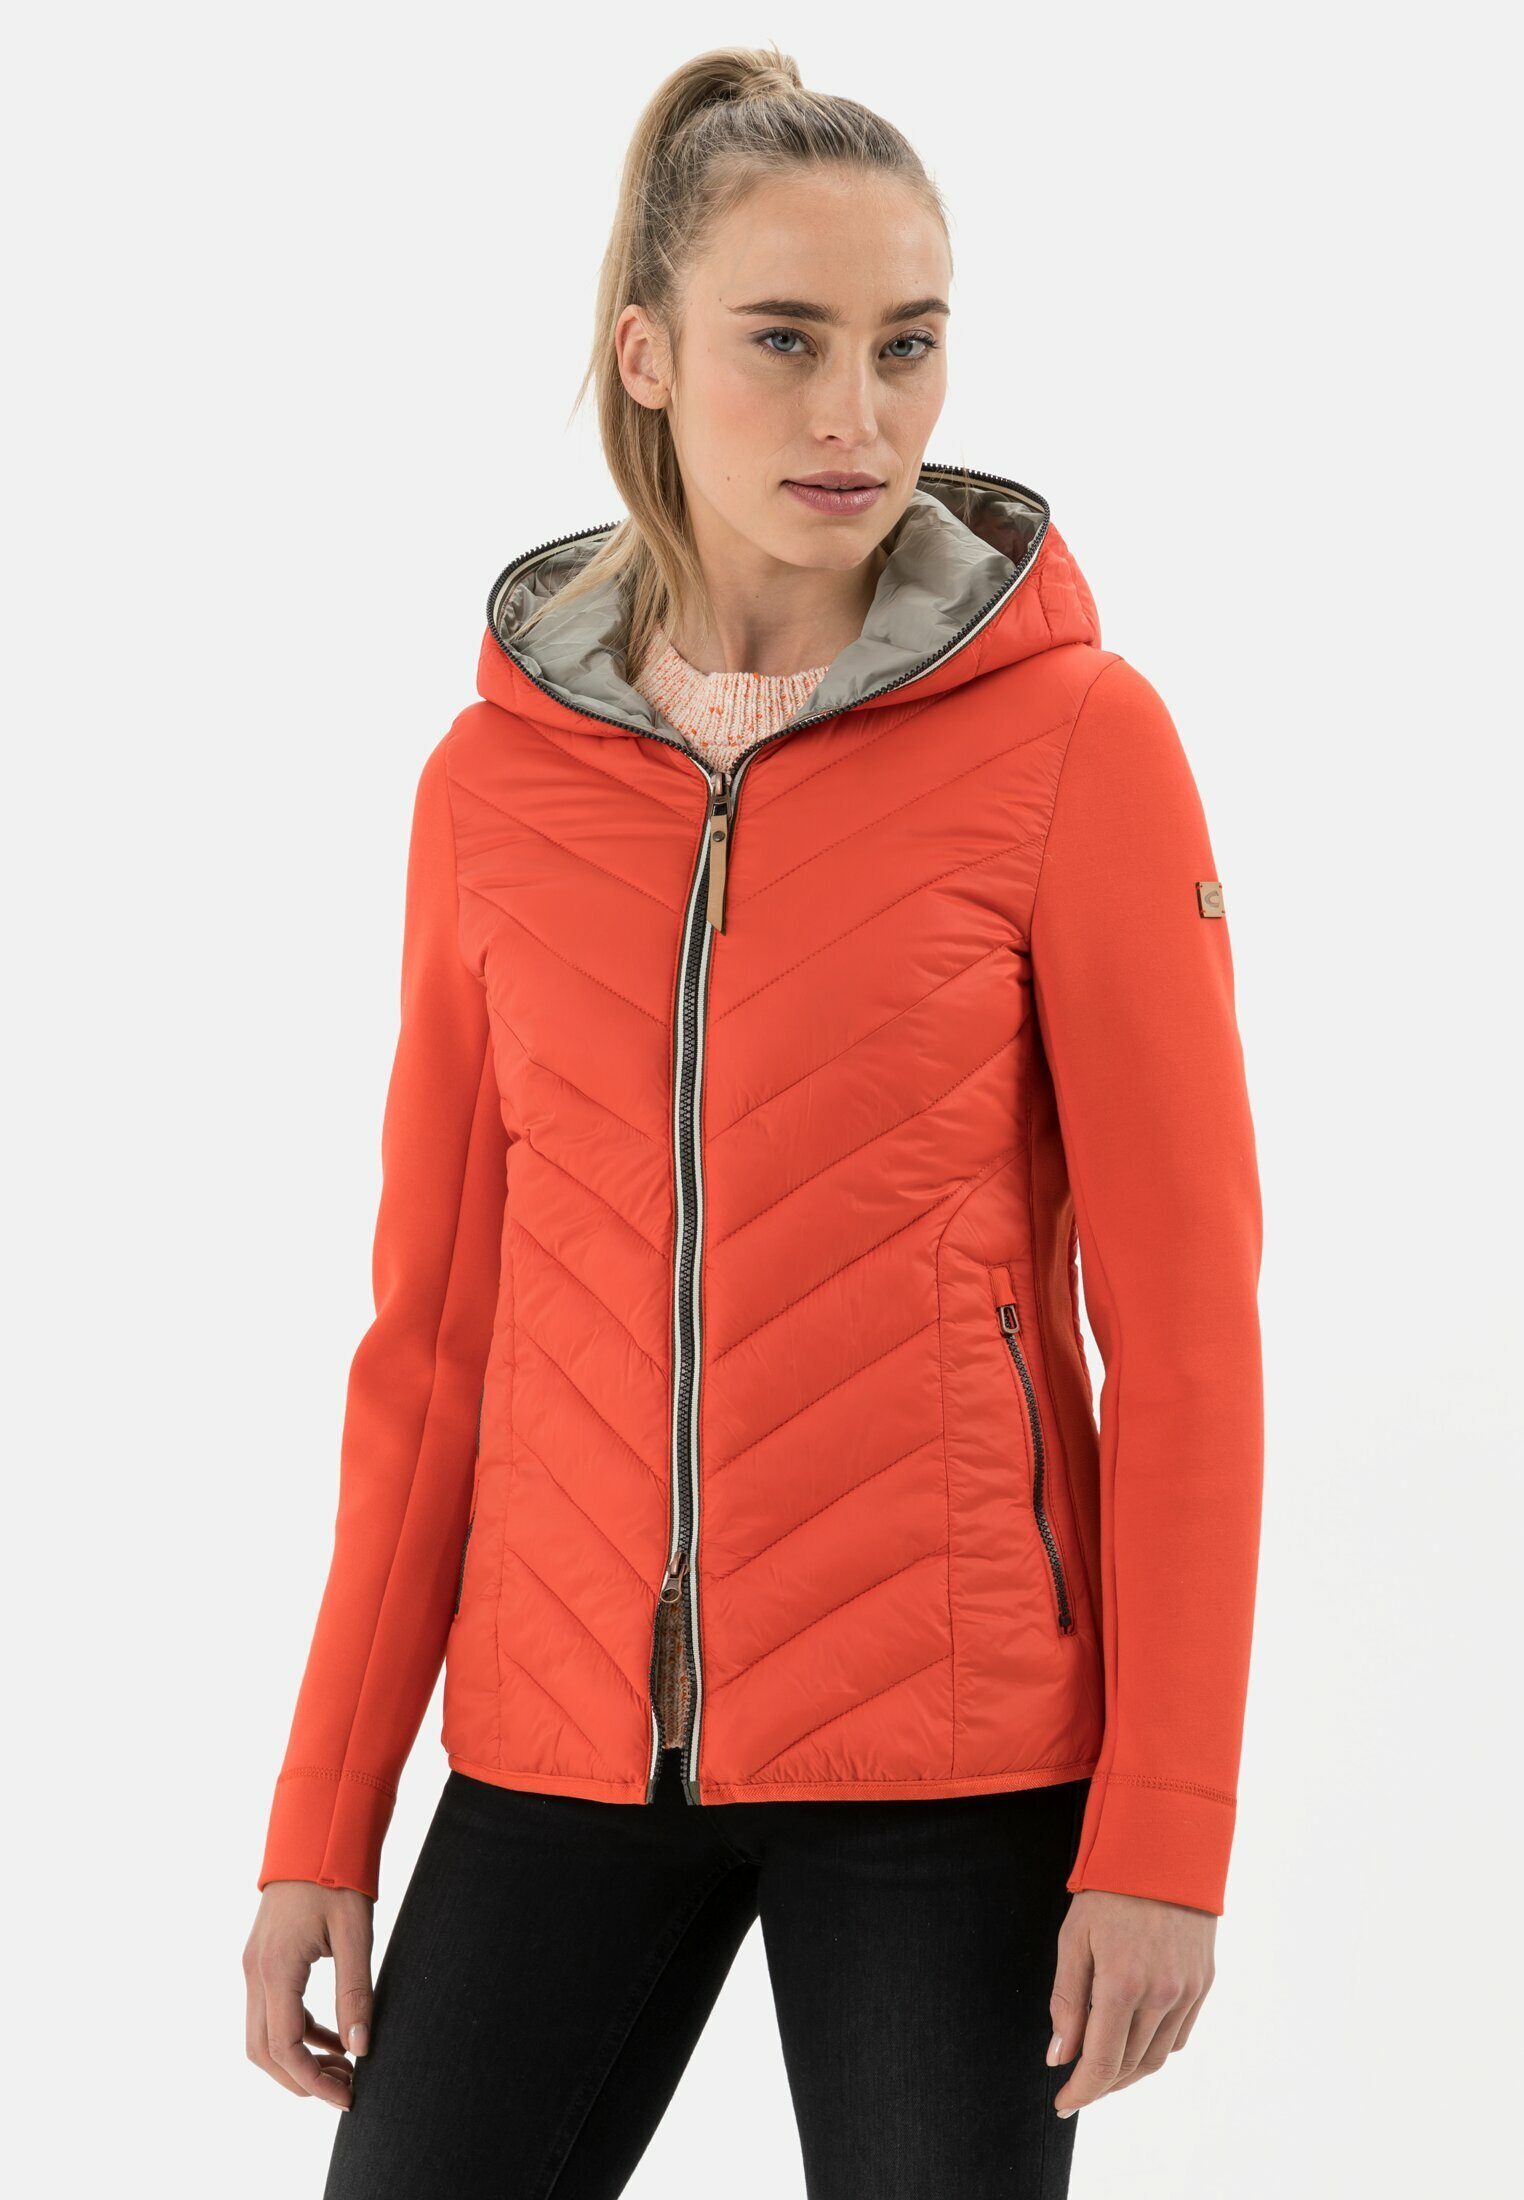 camel active Funktionsjacke aus recyceltem Materialmix Rot